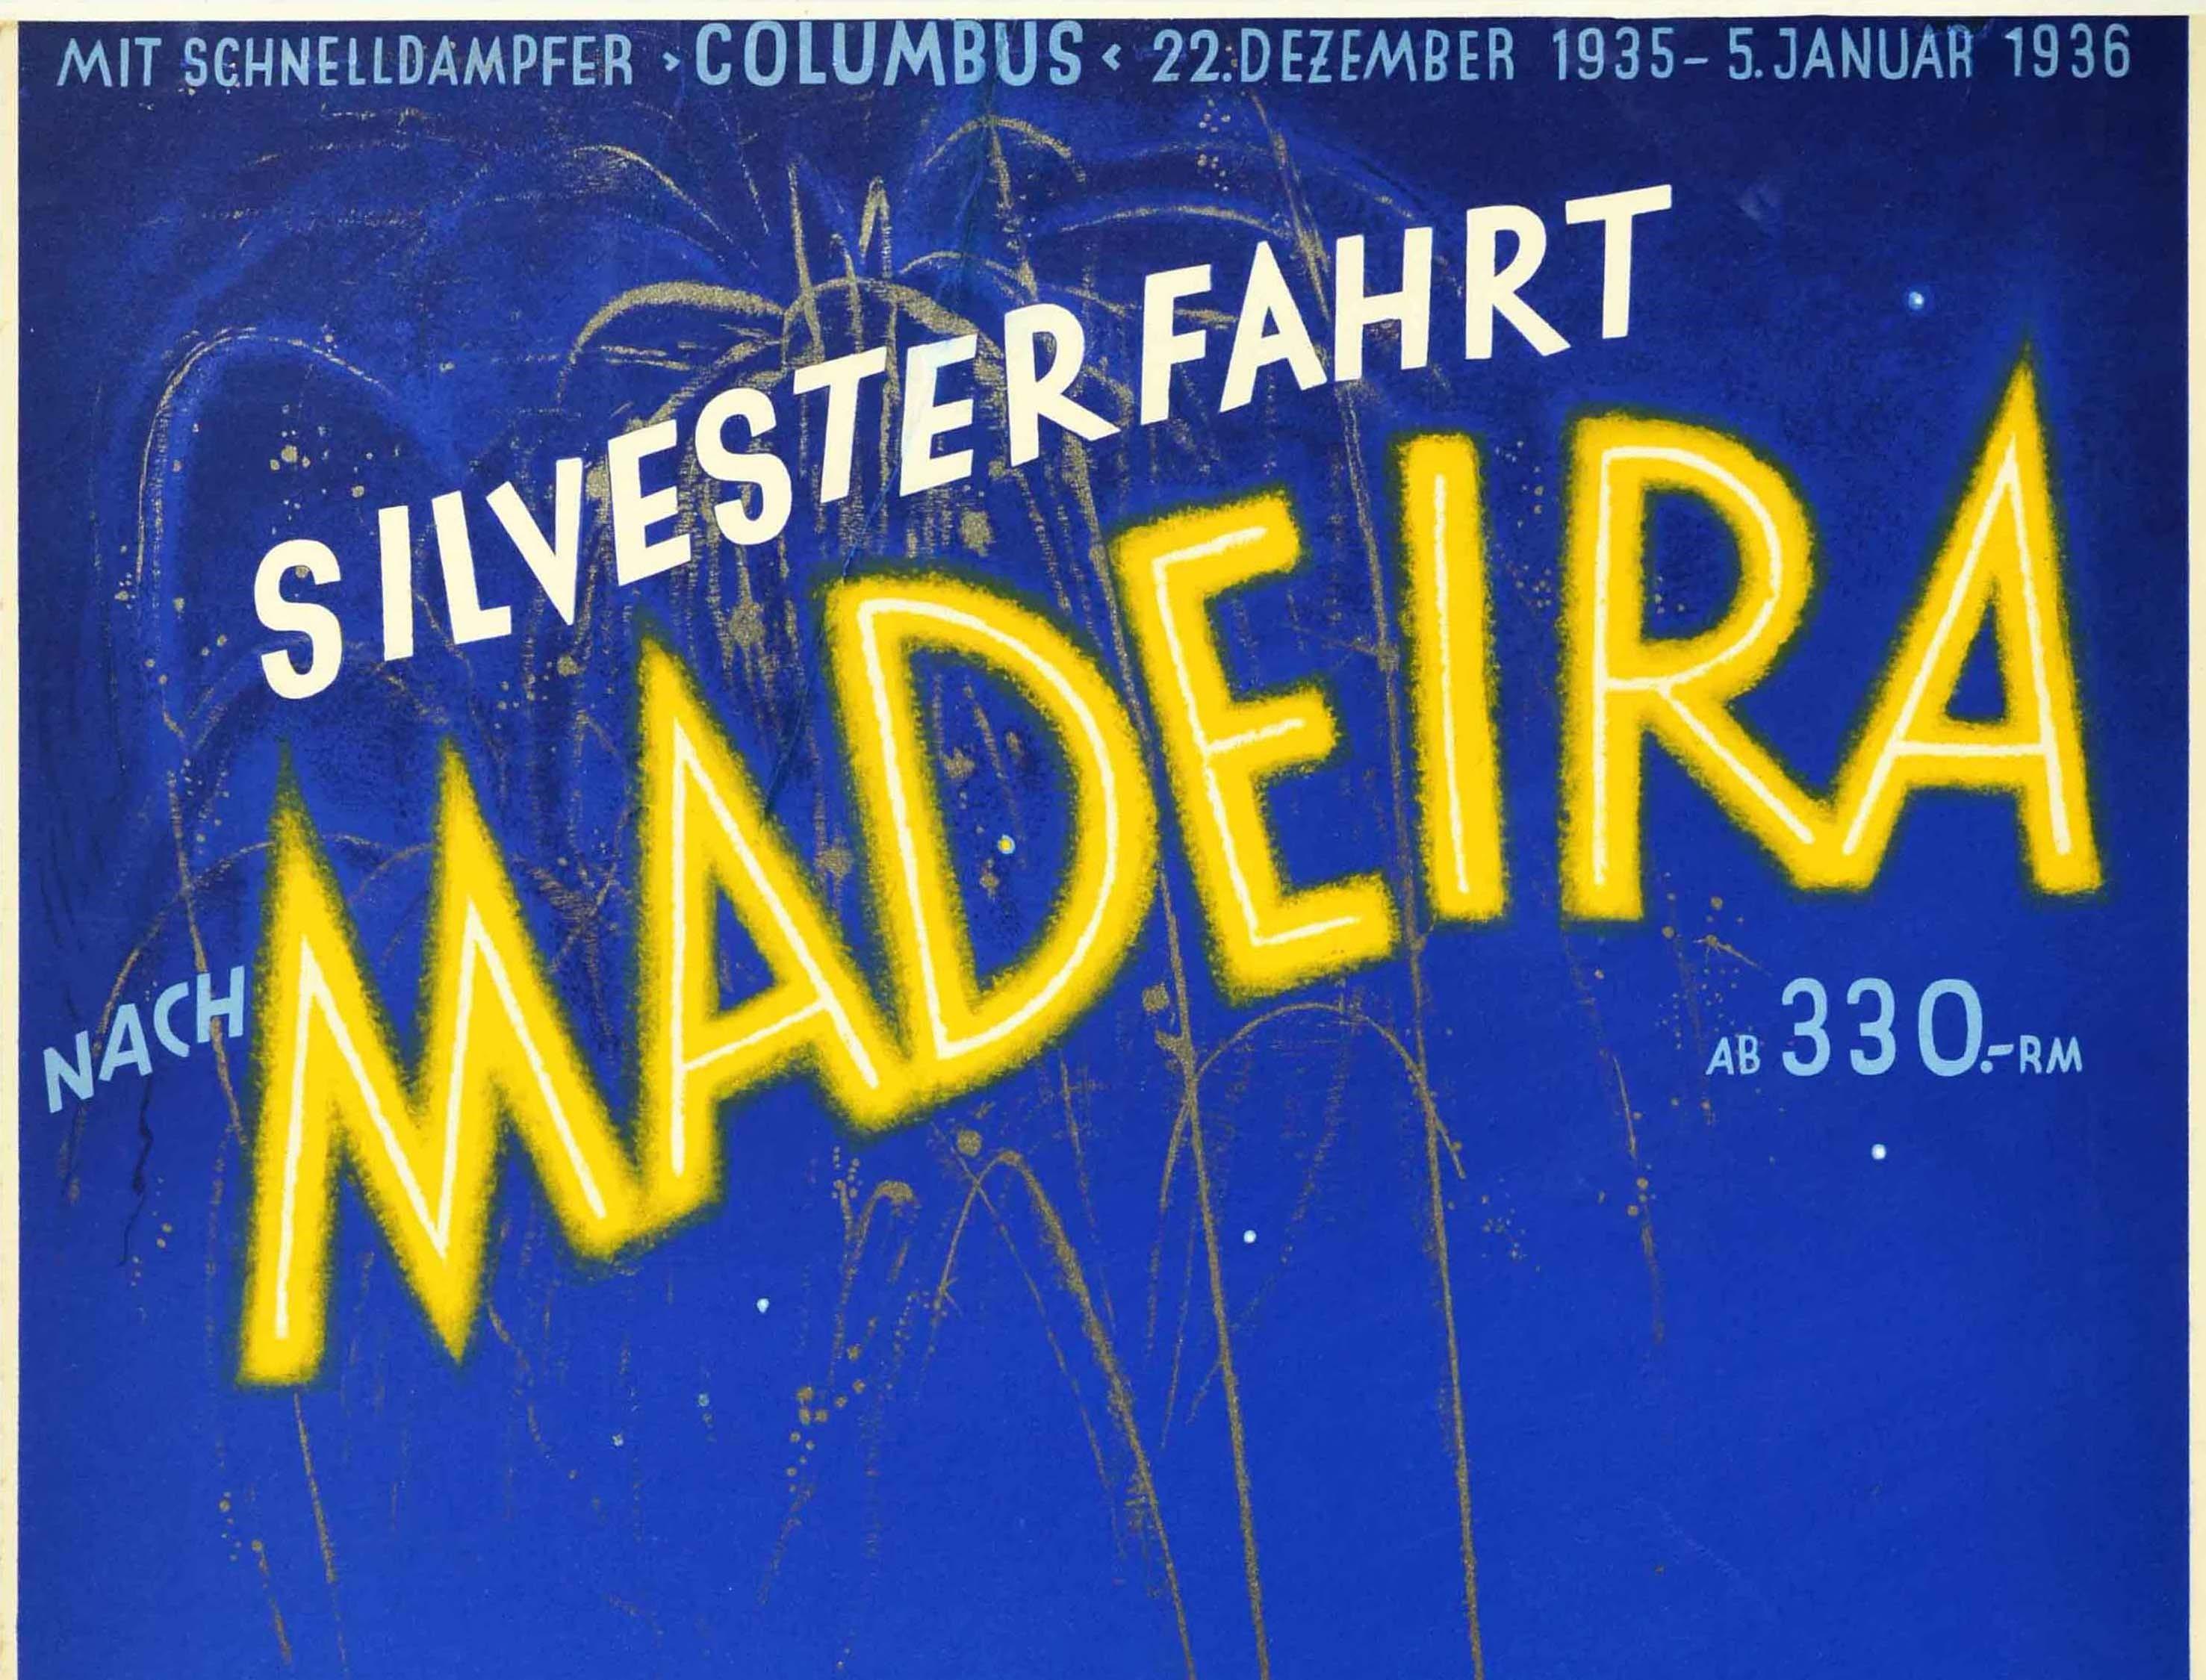 Original vintage cruise travel poster advertising a New Year's Eve trip to Madeira on the express steamer Columbus from 22 December 1935 to 5 January 1936 with Norddeutscher Lloyd Bremen from 330RM - Silvesterfahrt nach Madeira - featuring a great